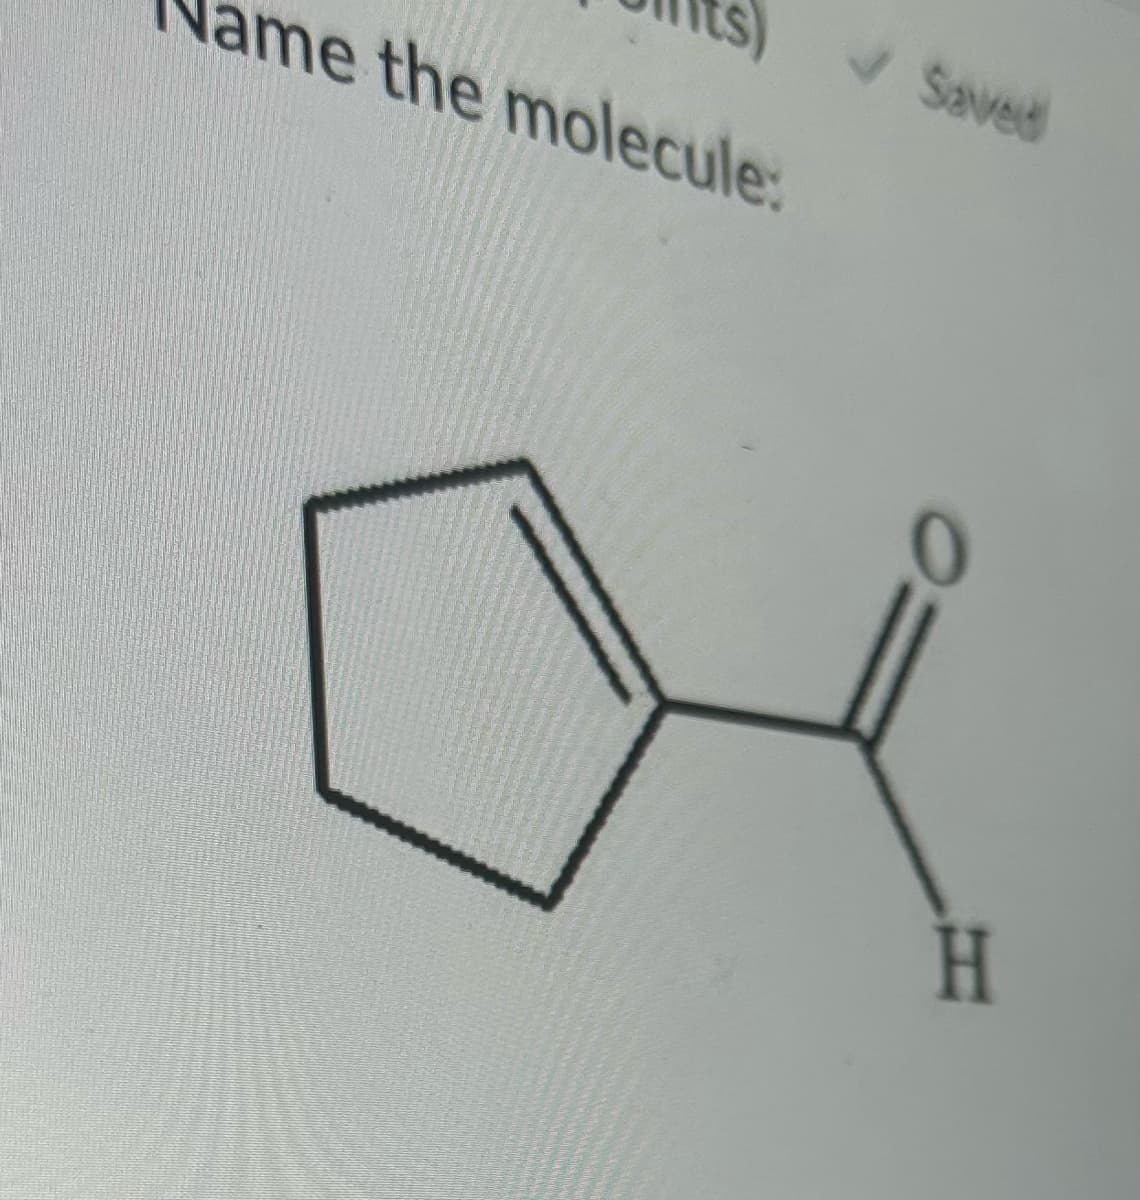 came the molecule:
✓ Saved
0
H